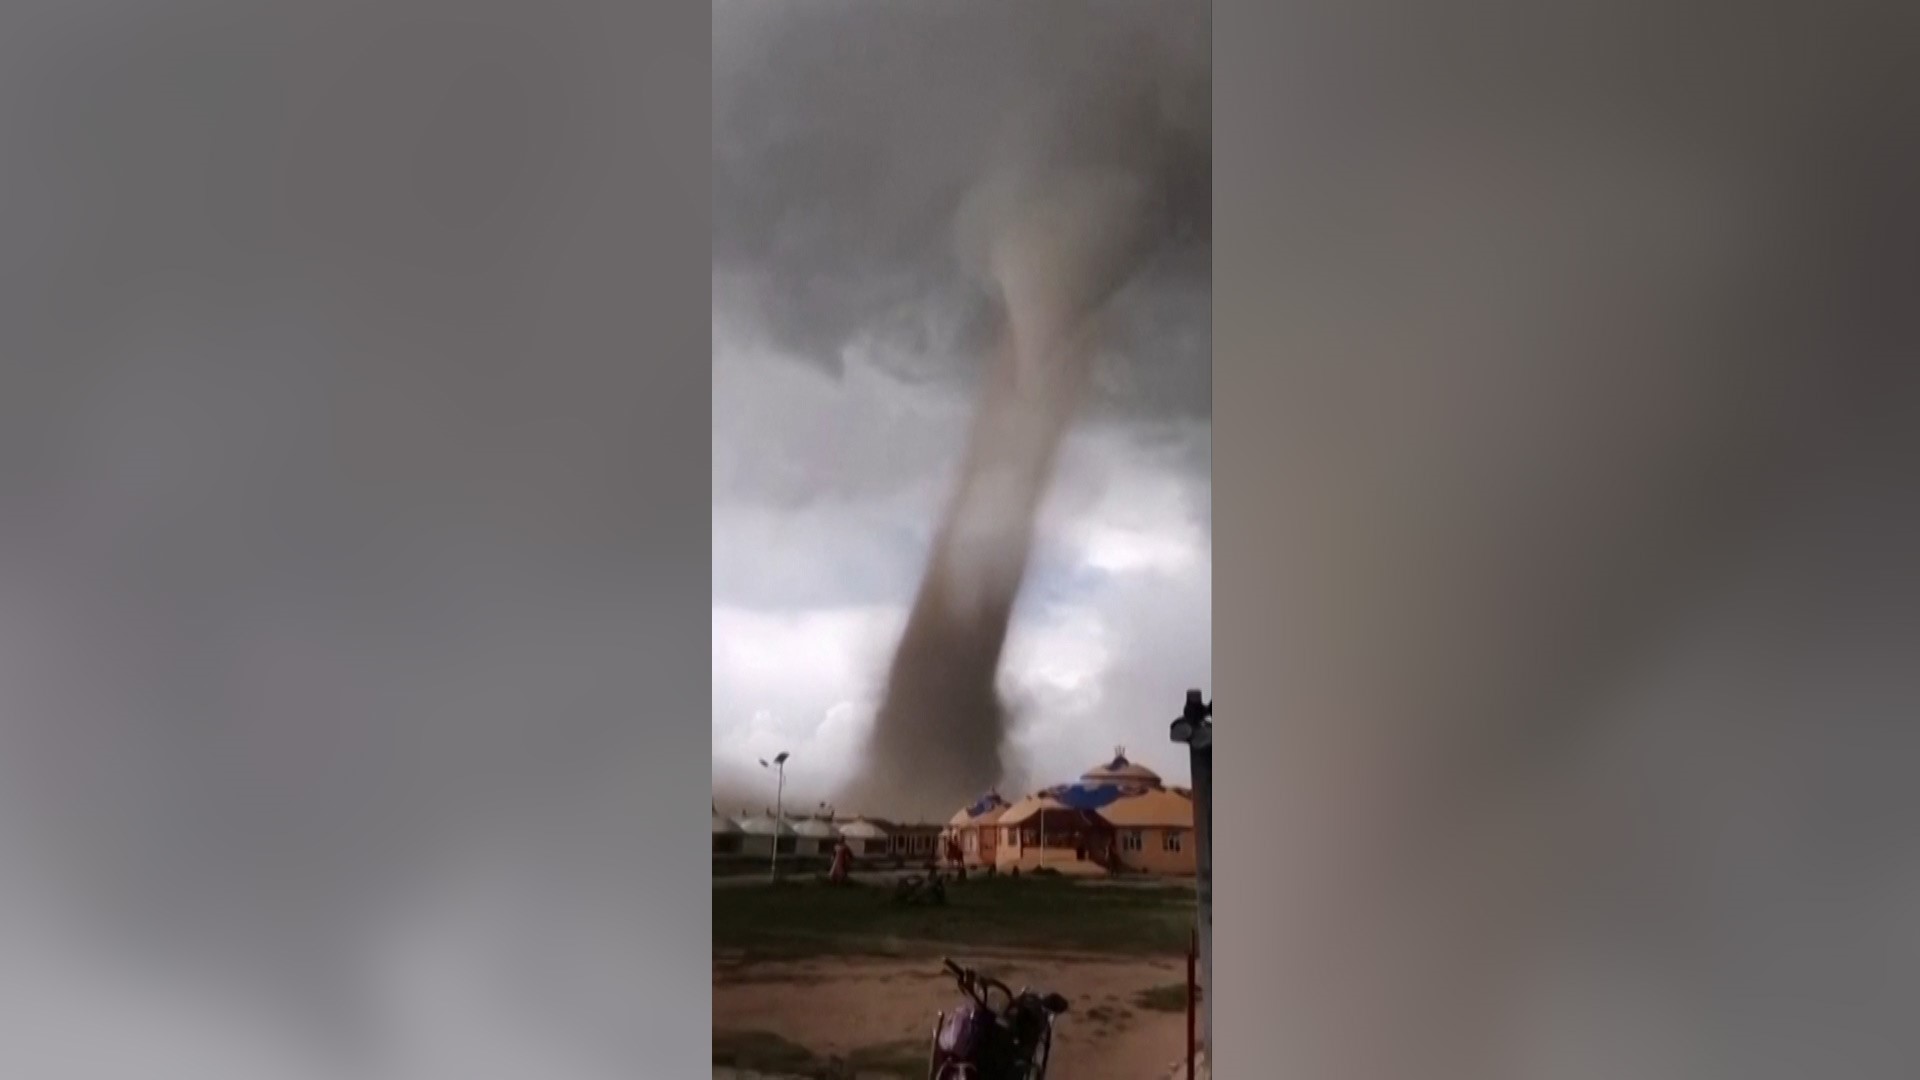 A tornado hit Baotou City of northern China on Aug. 9, 2020, injuring 33 people.